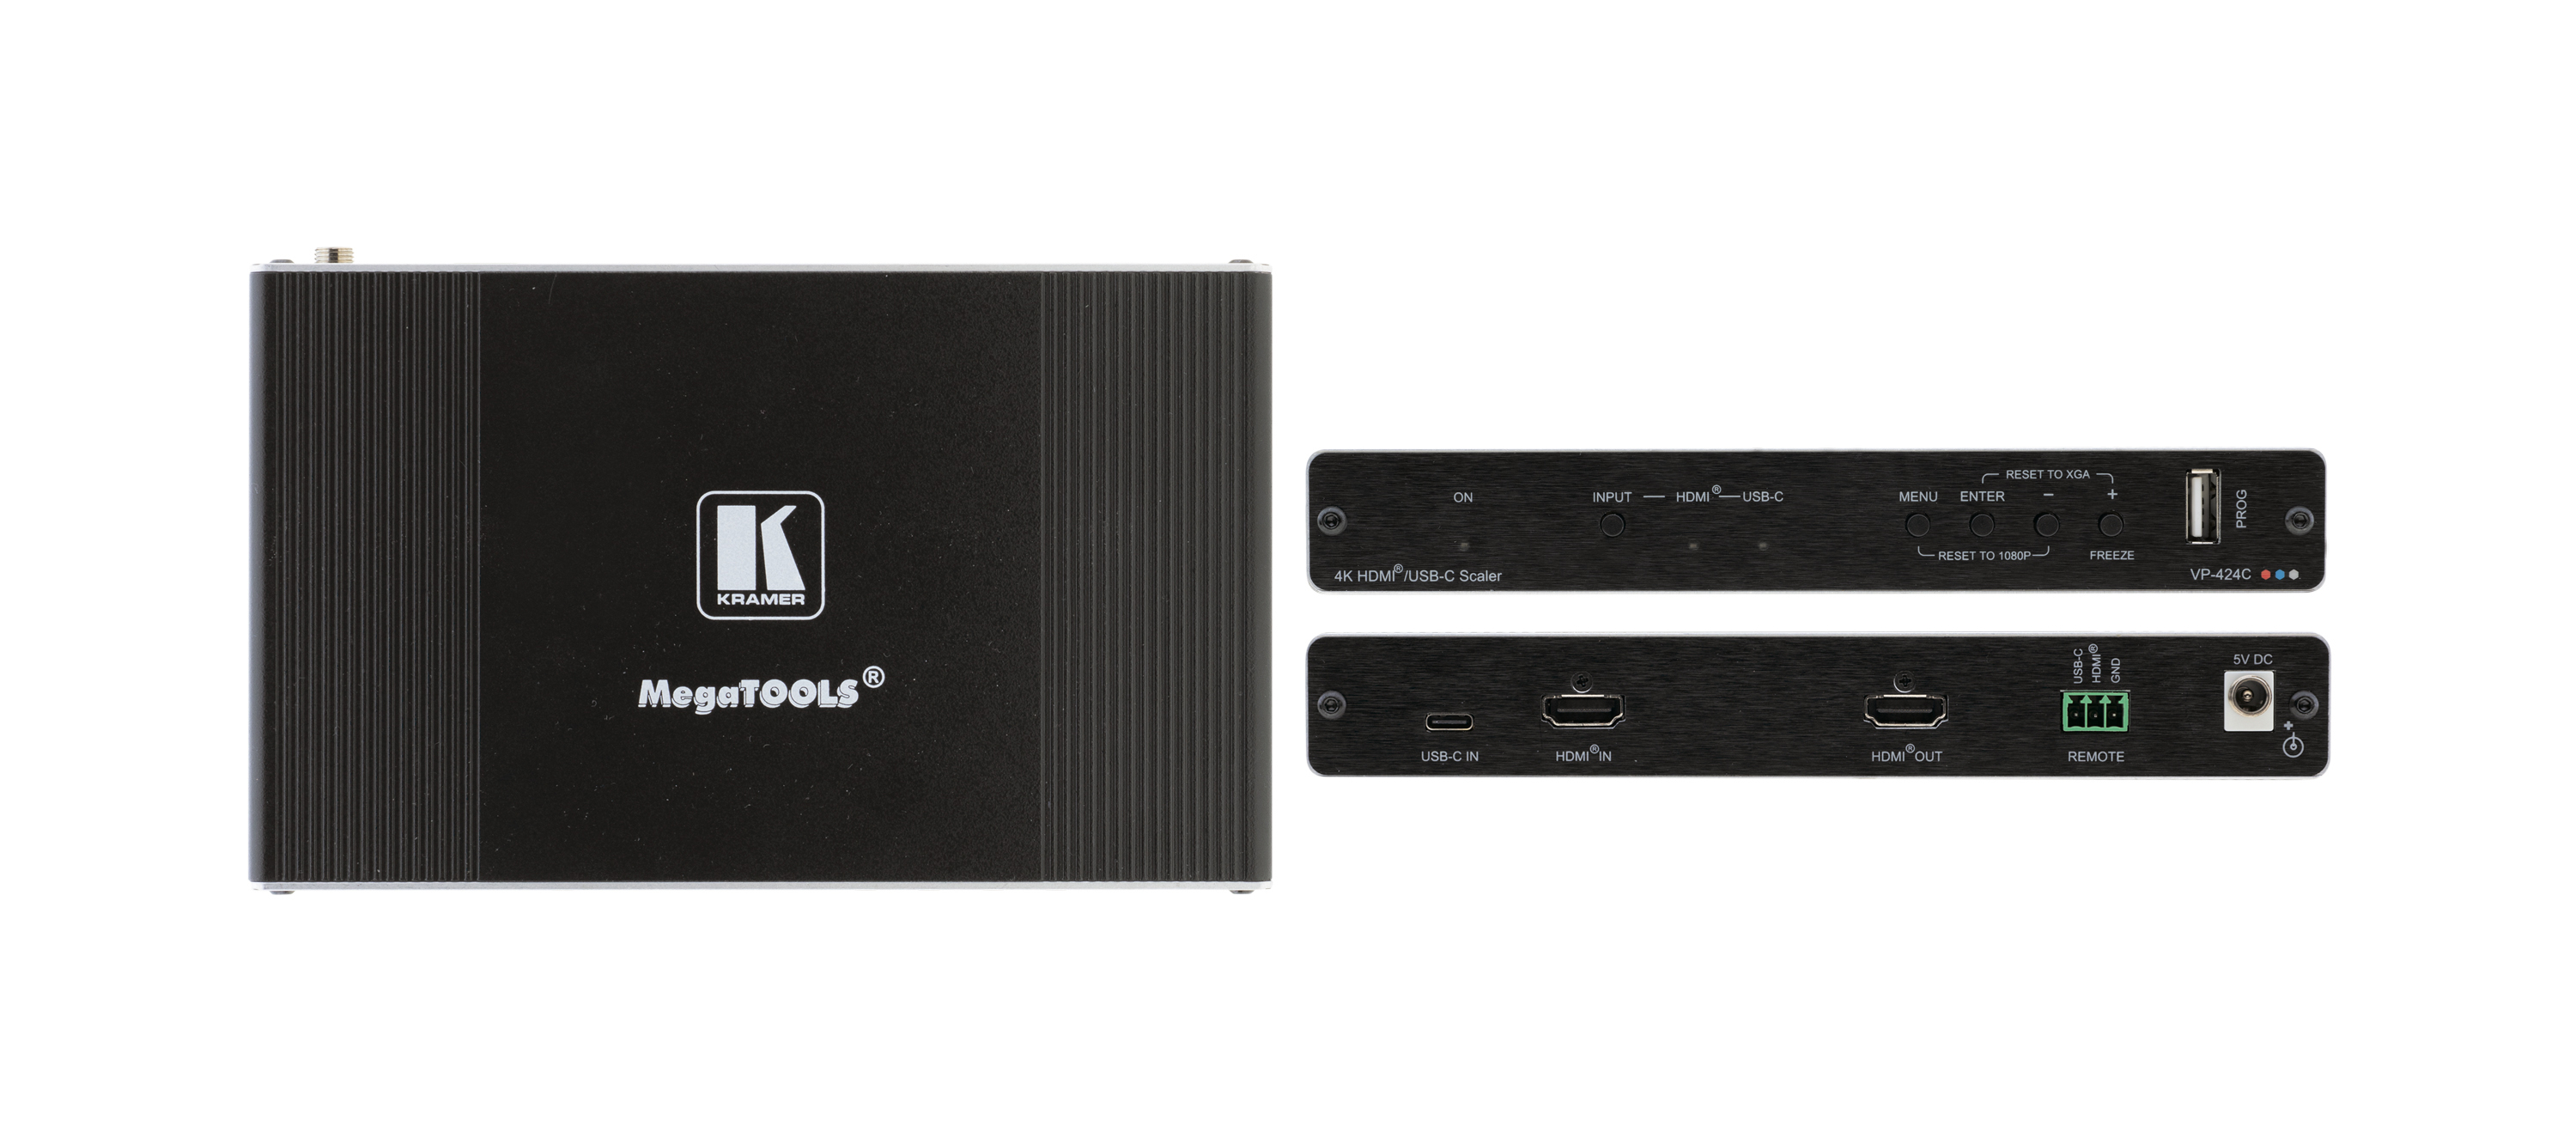 VP-424C 18G 4K HDMI and USB-C to HDMI Scaler